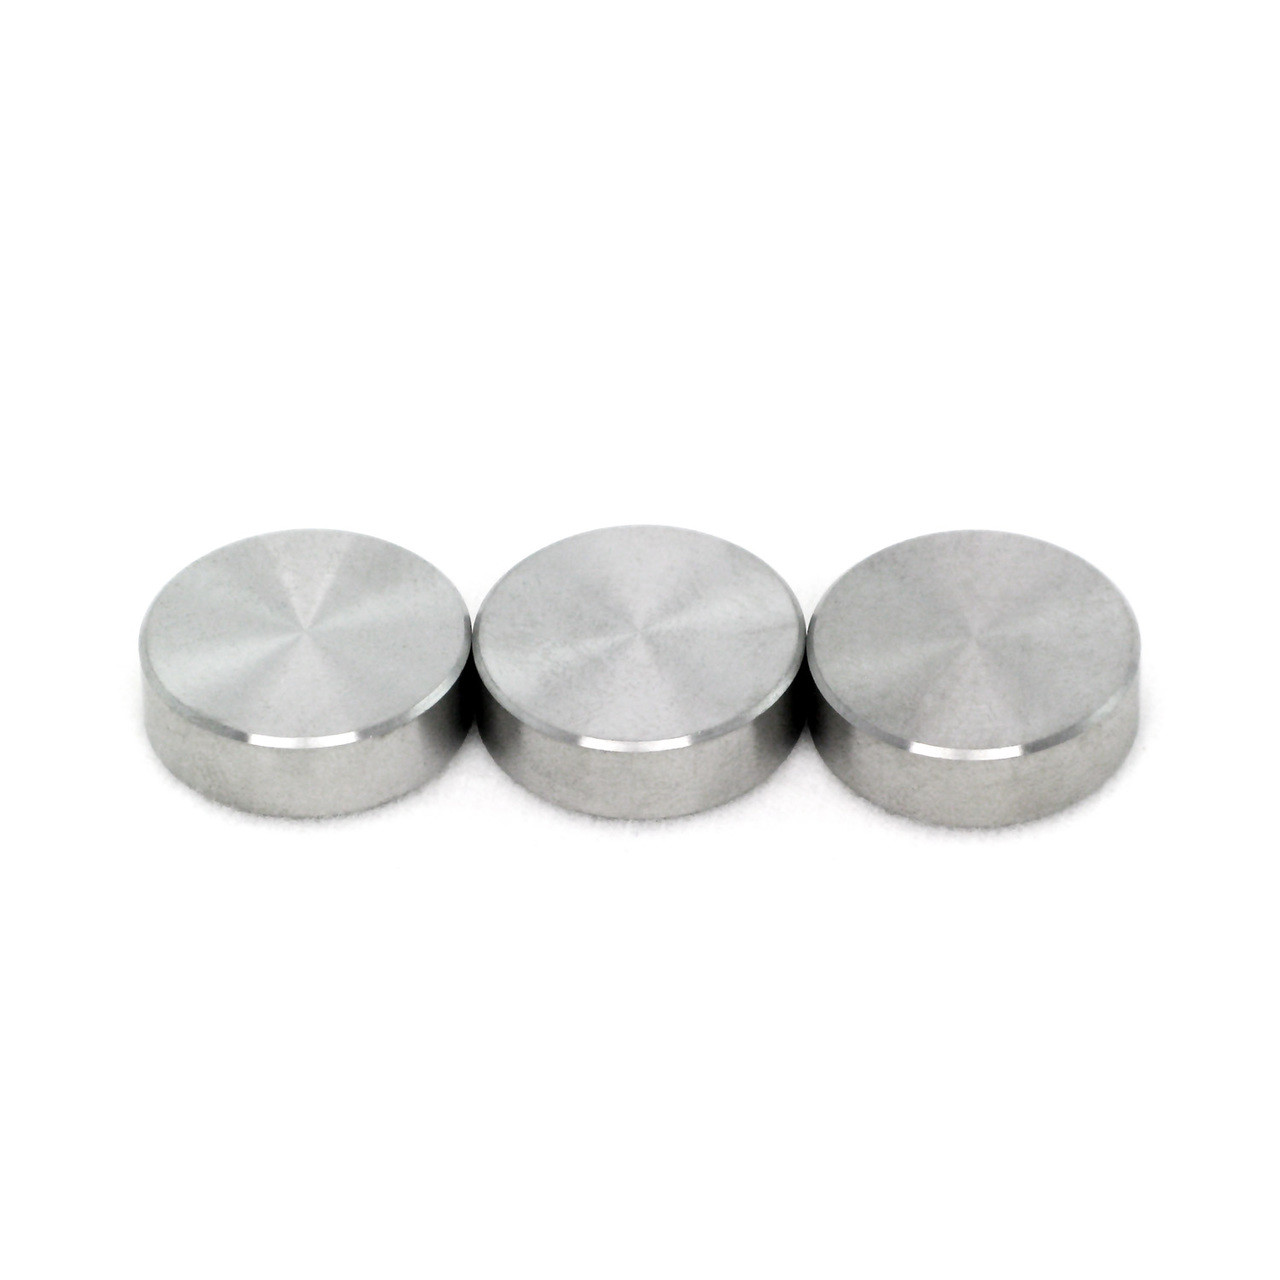 Pinewood Derby Weight 3-Pack, 1.59 oz